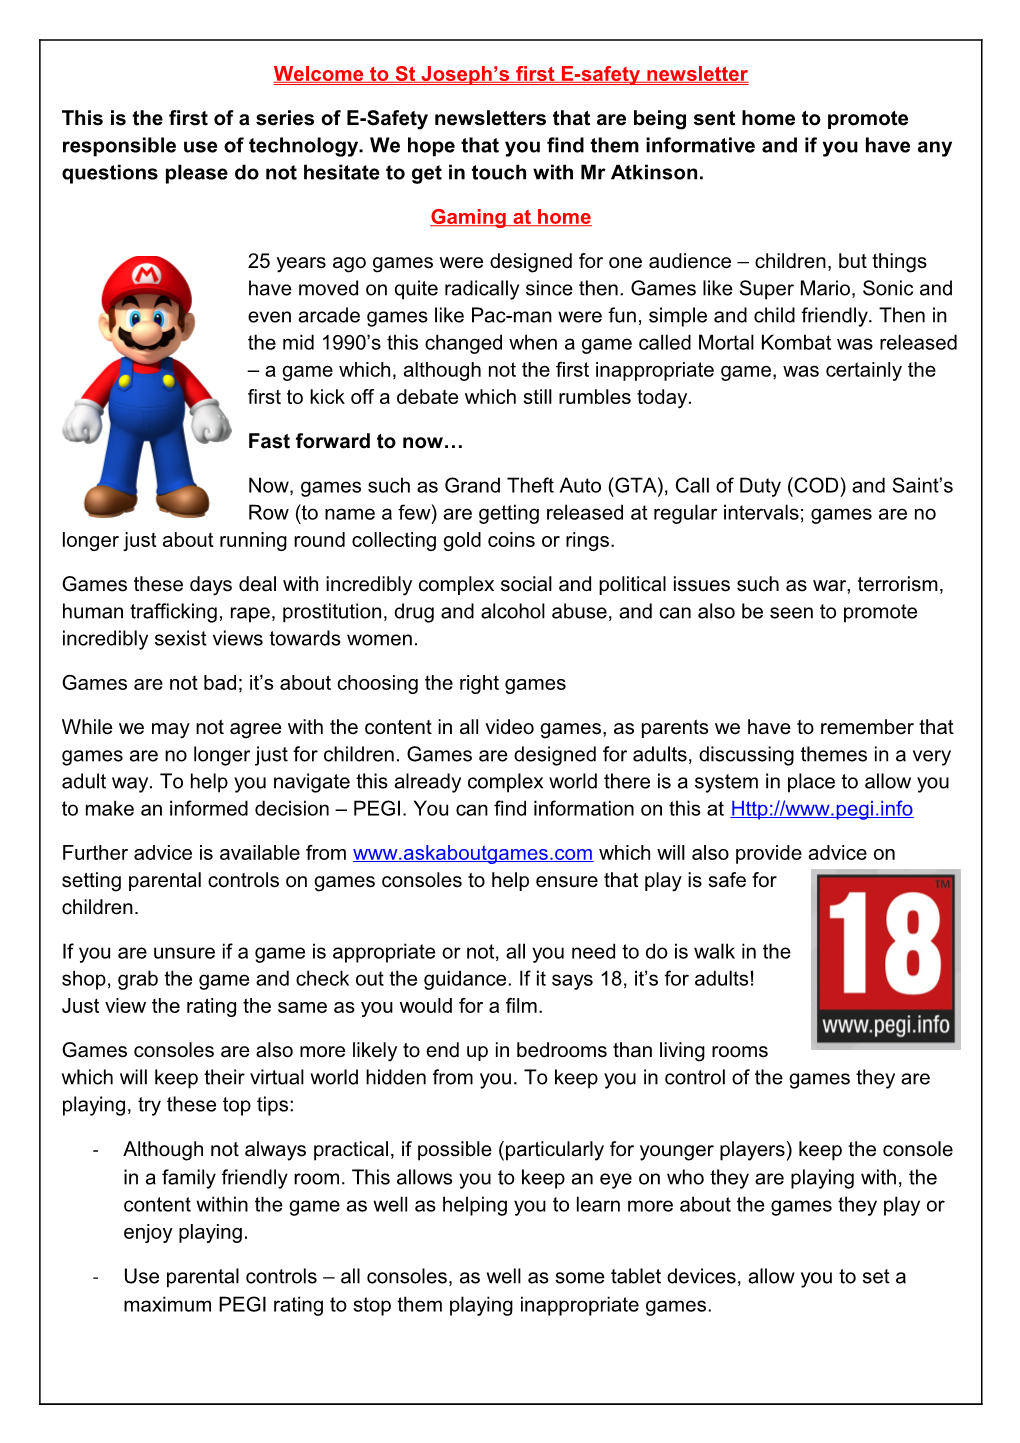 Welcome to St Joseph S First E-Safety Newsletter